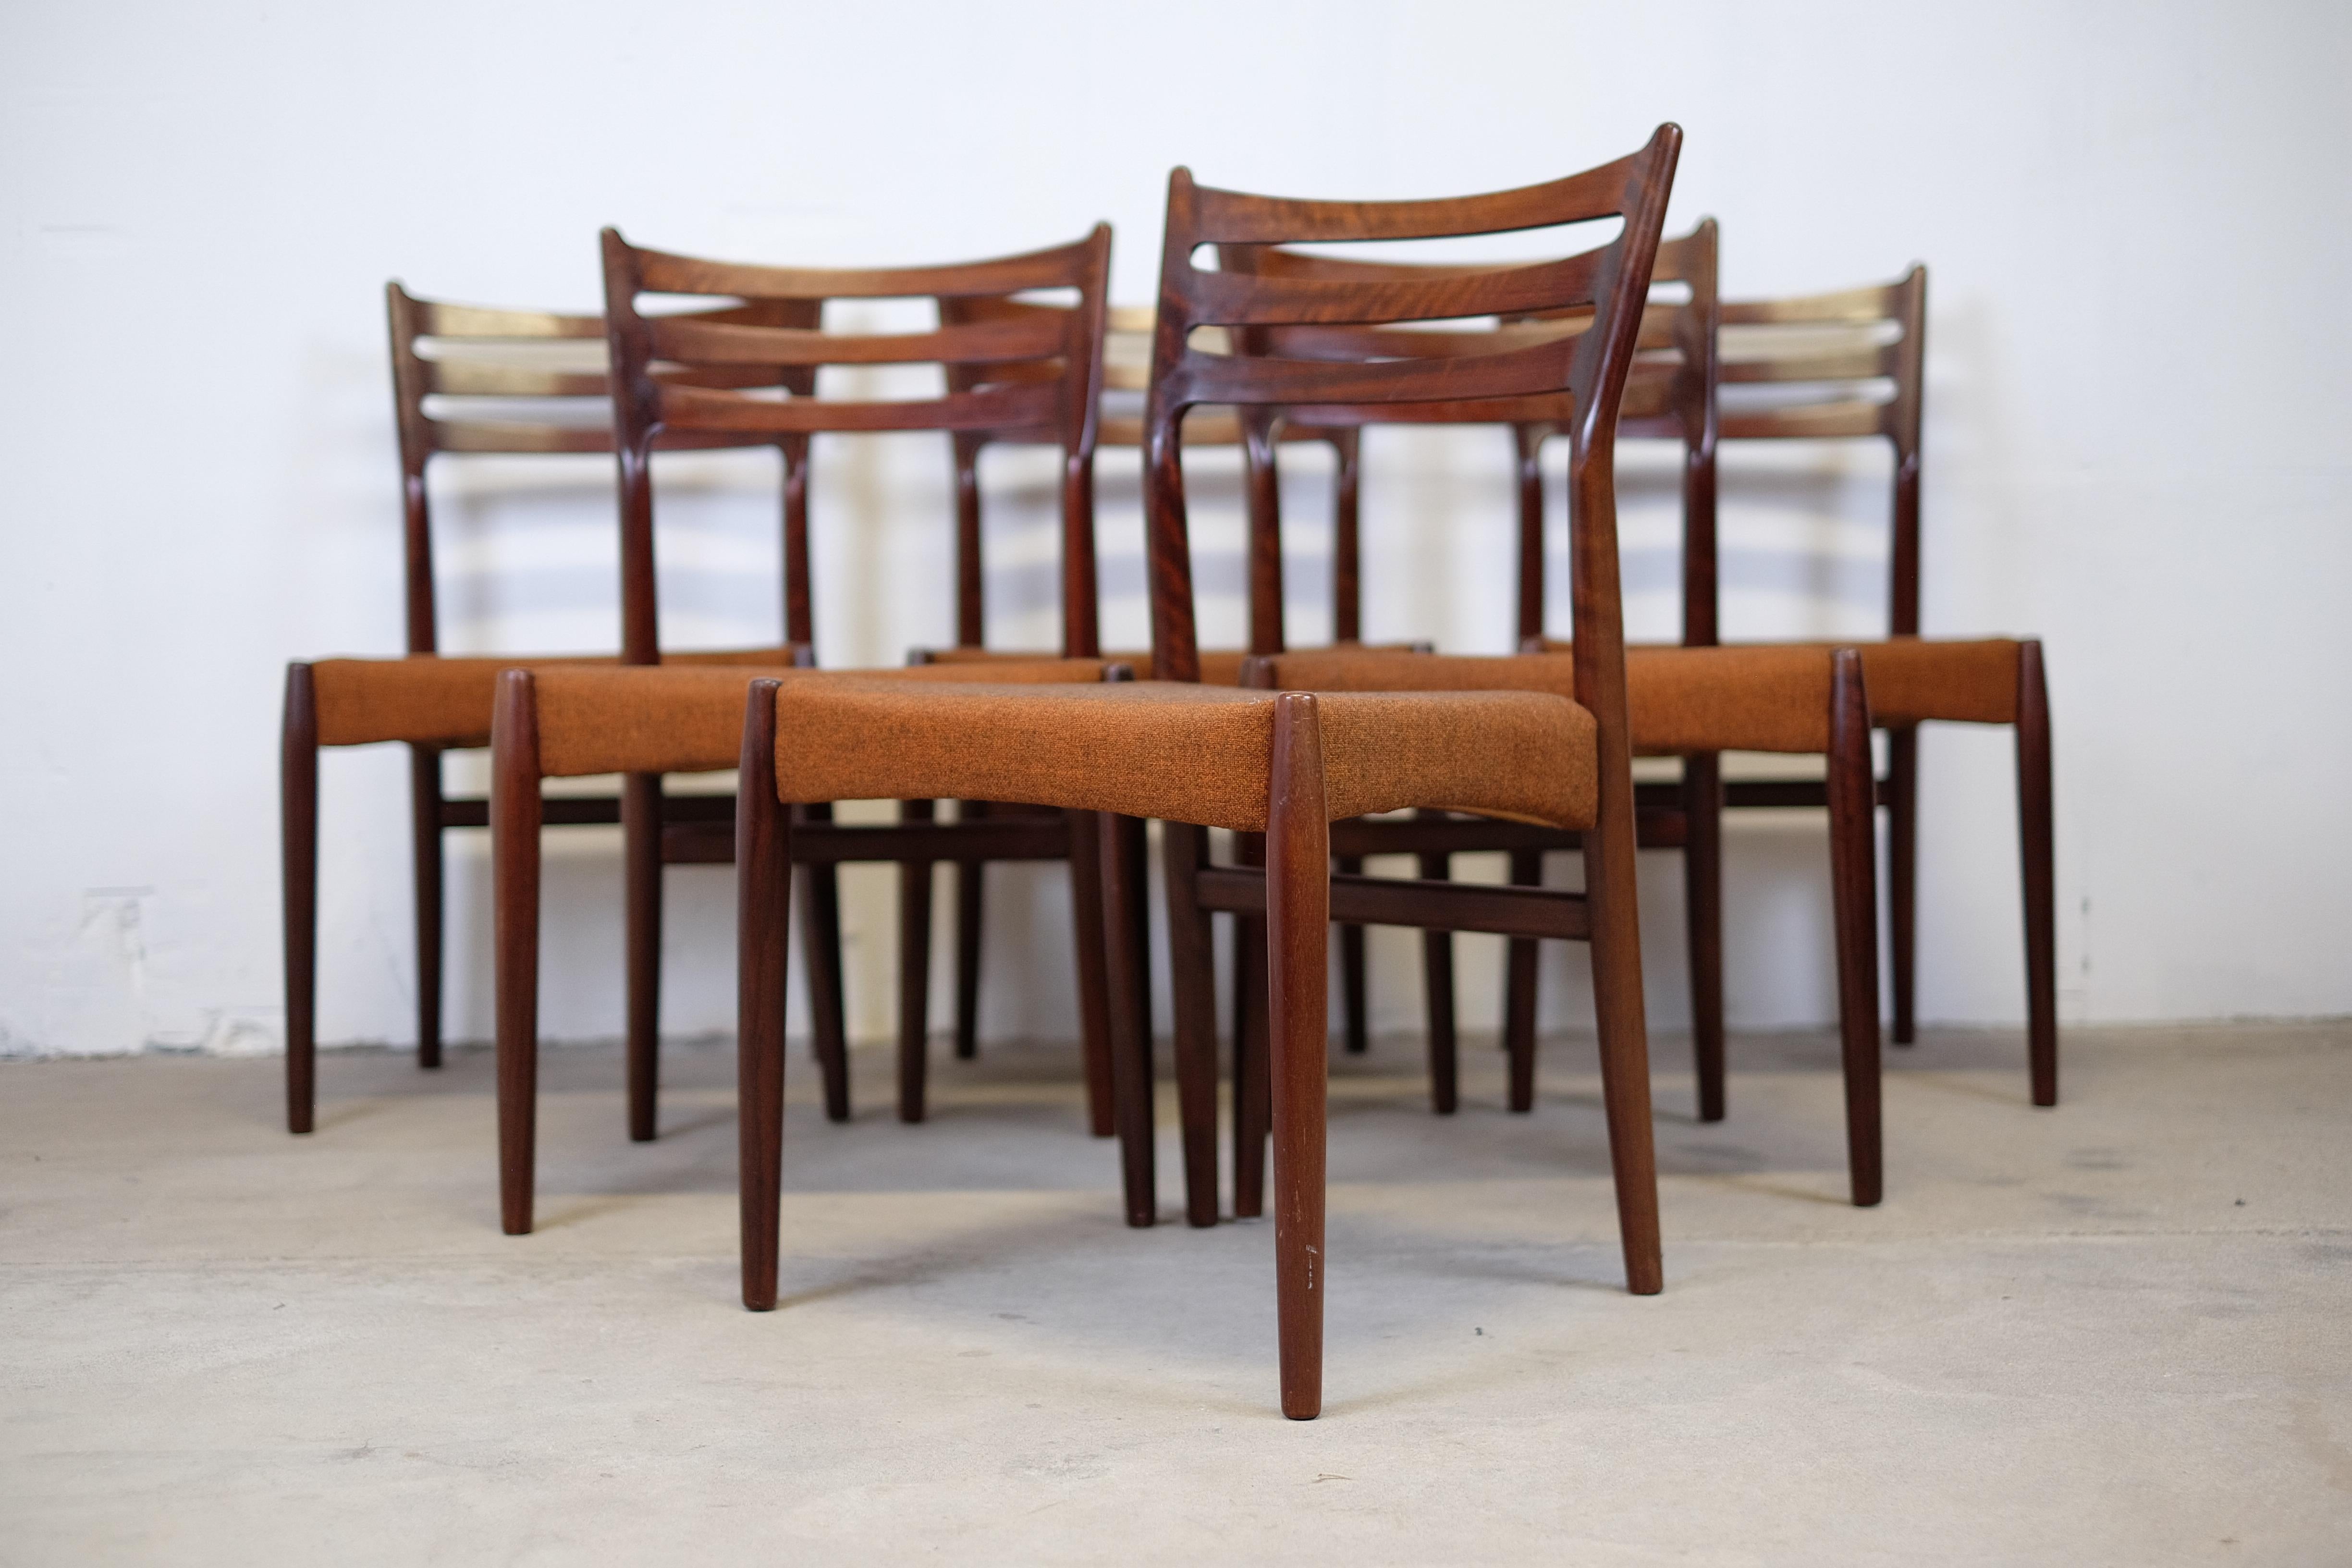 Elegant and rare set from Danish designer Svend Aage Madsen.

These beautiful chairs with slightly curved backrests has great seating comfort and a majestic expression that gives the chair everything we know Svend Aage Madsen best for. You can see